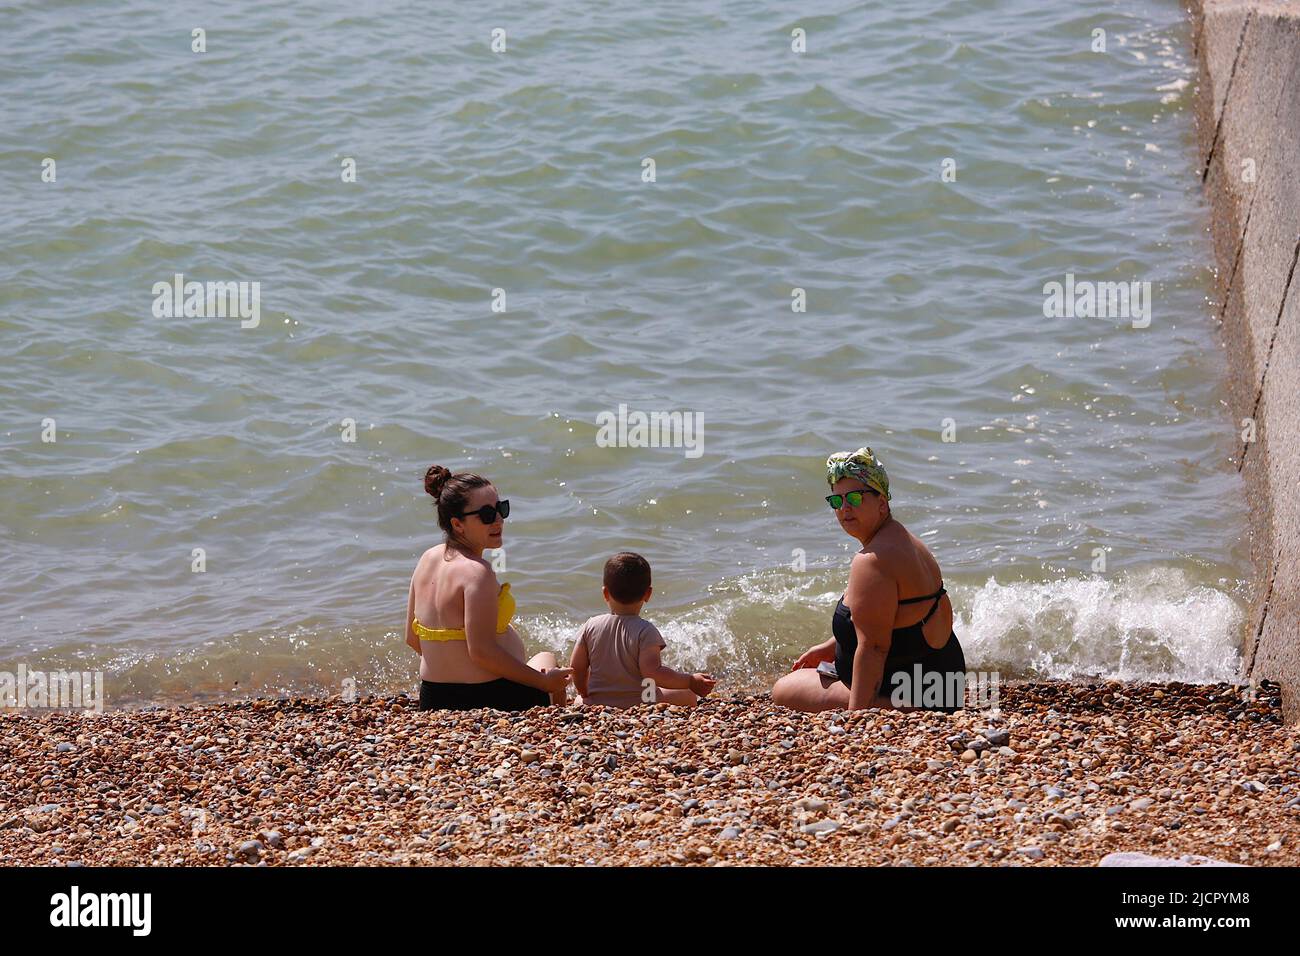 Hastings, East Sussex, UK. 15 Jun, 2022. UK Weather: Hot and sunny at the seaside town of Hastings in East Sussex as Brits enjoy the warm weather today along the seafront promenade. Photo Credit: Paul Lawrenson /Alamy Live News Stock Photo